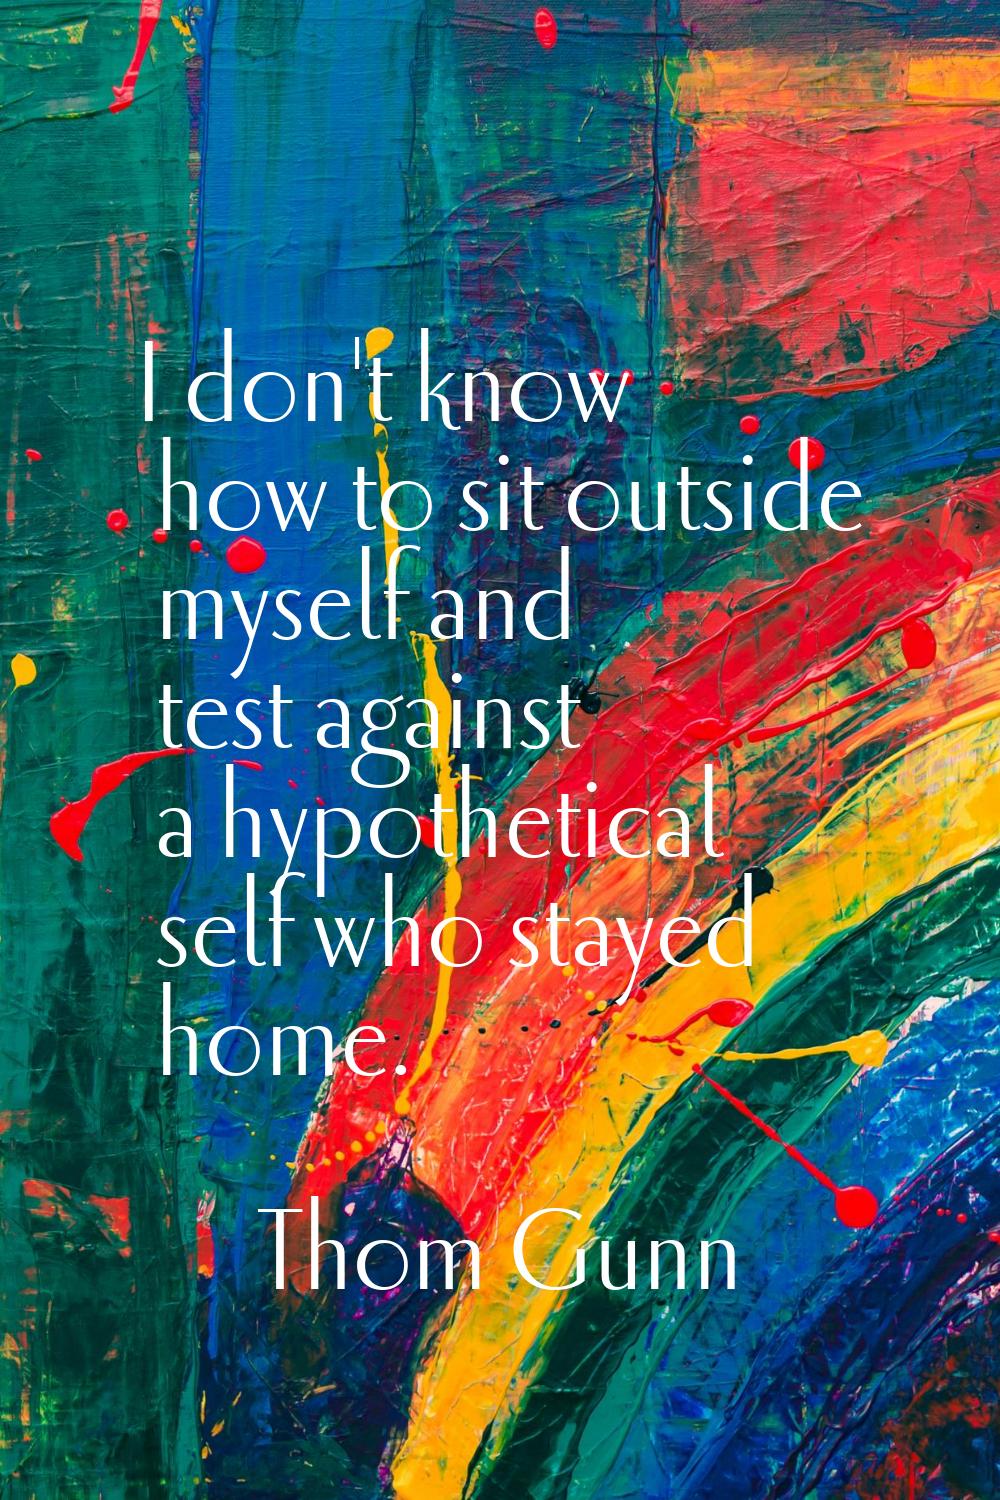 I don't know how to sit outside myself and test against a hypothetical self who stayed home.